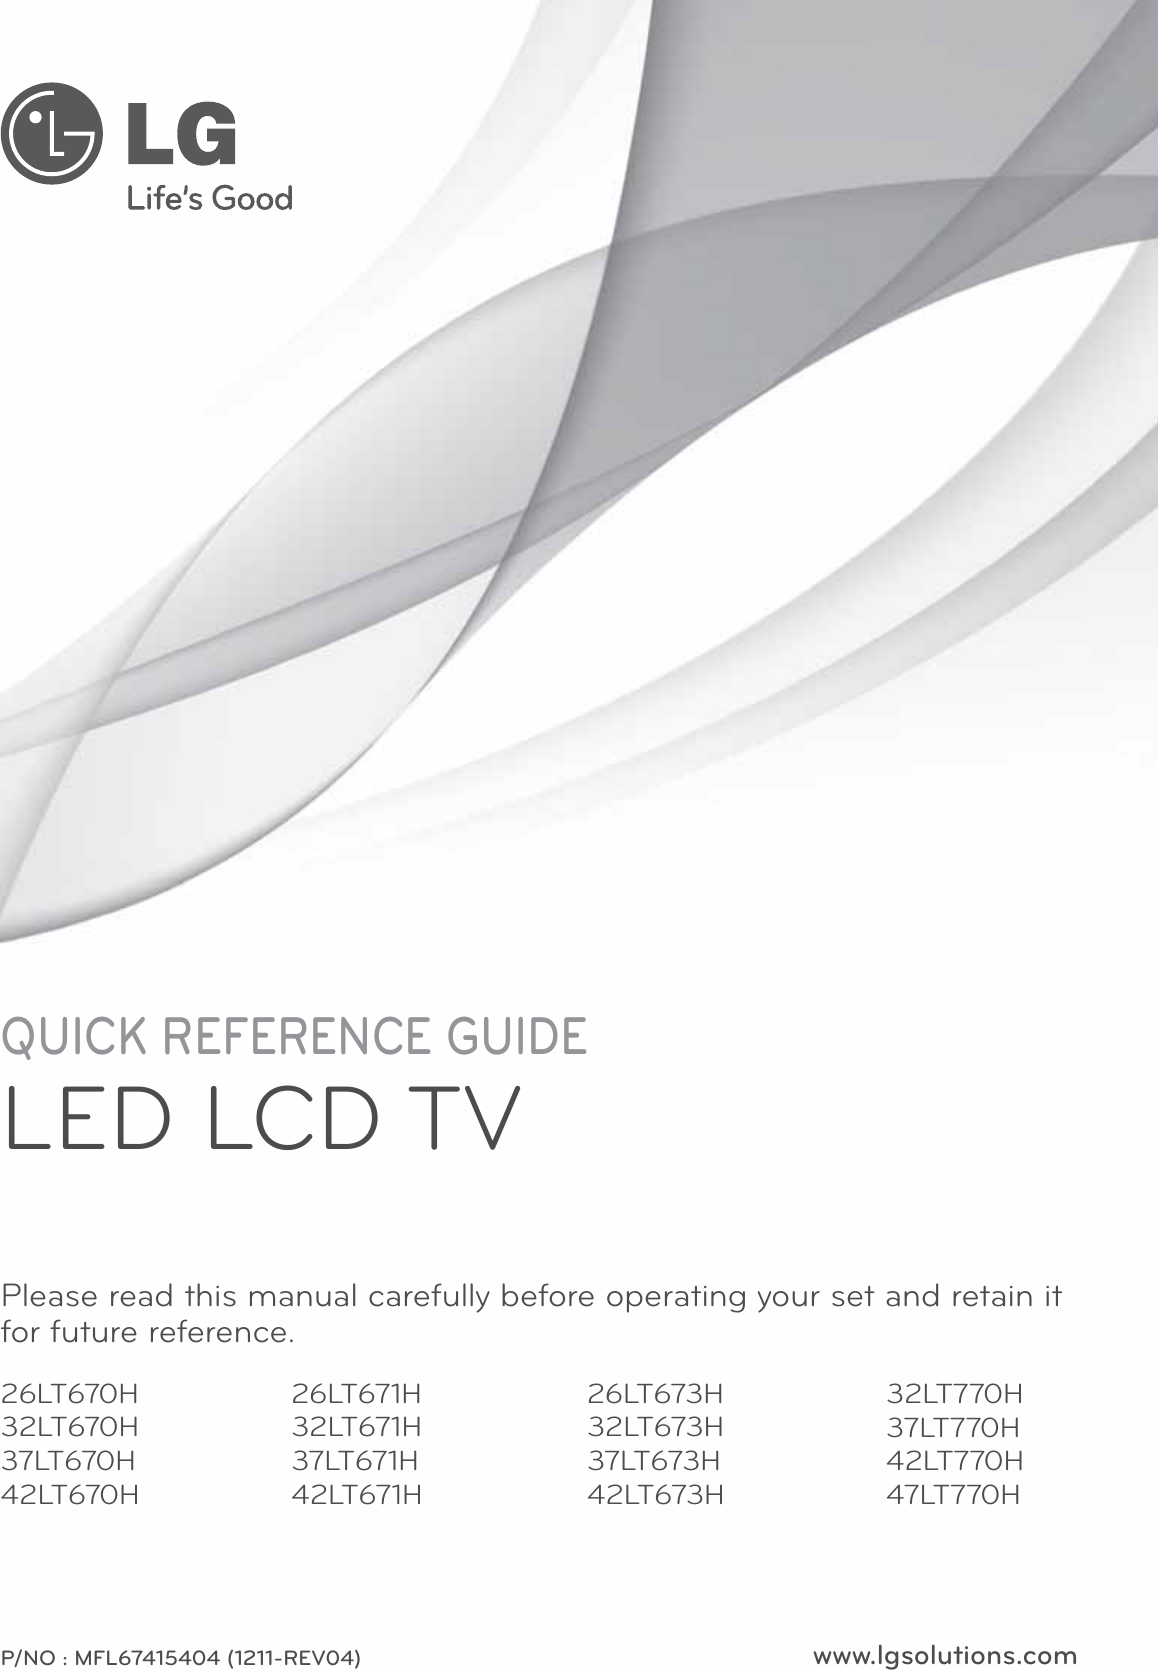 www.lgsolutions.comQUICK REFERENCE GUIDELED LCD TVPlease read this manual carefully before operating your set and retain it for future reference.P/NO : MFL67415404 (1211-REV04)26LT670H32LT670H37LT670H42LT670H26LT673H32LT673H37LT673H42LT673H26LT671H32LT671H37LT671H42LT671H32LT770H37LT770H42LT770H47LT770H